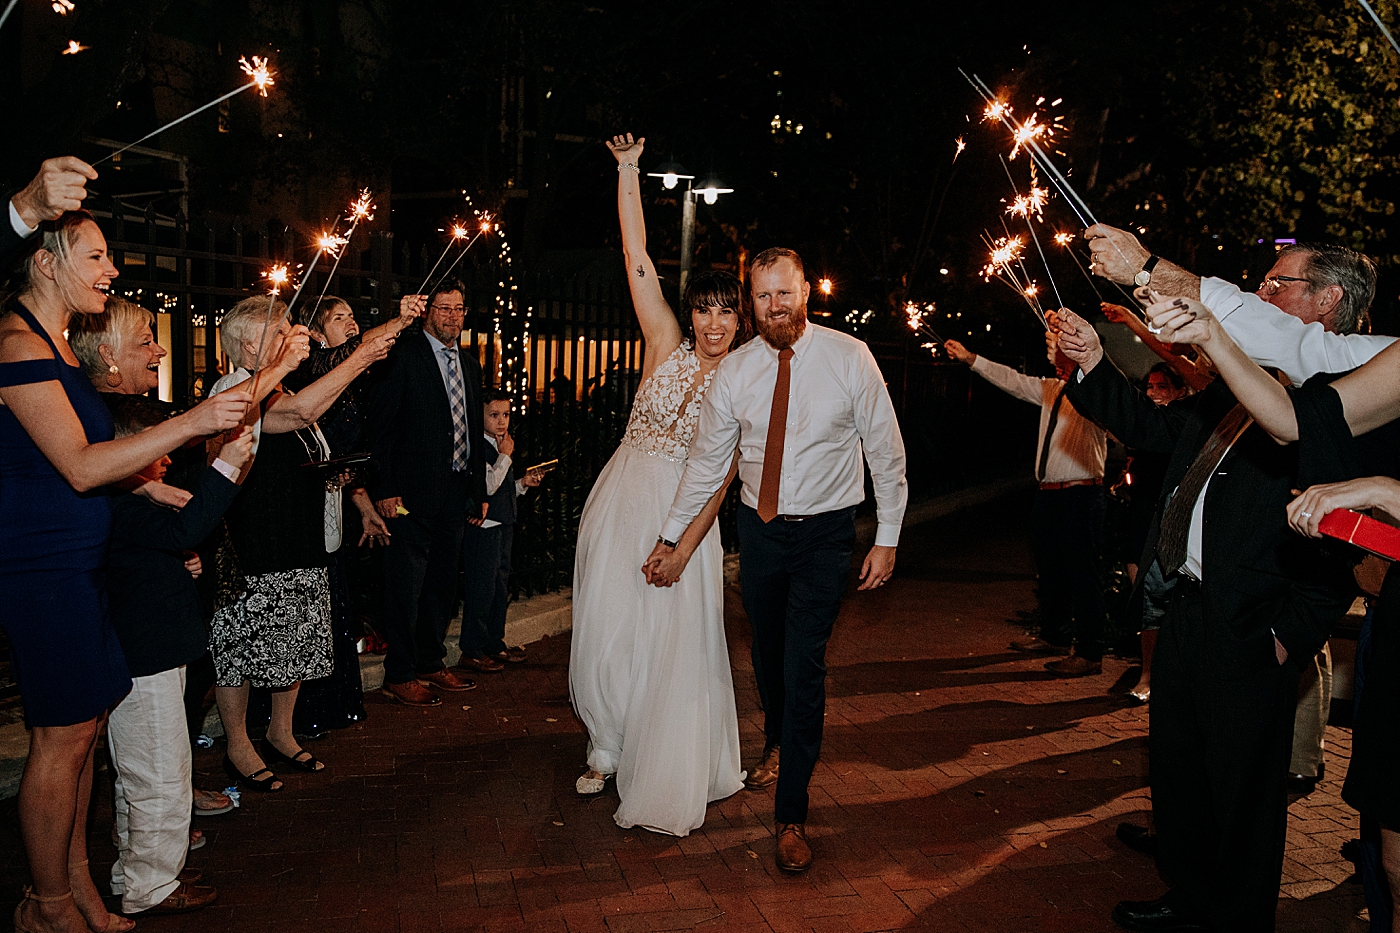 Bride and Groom exiting with sparklers Historic Stranahan House Wedding Photography captured by South Florida Wedding Photographer Maggie Alvarez Photography